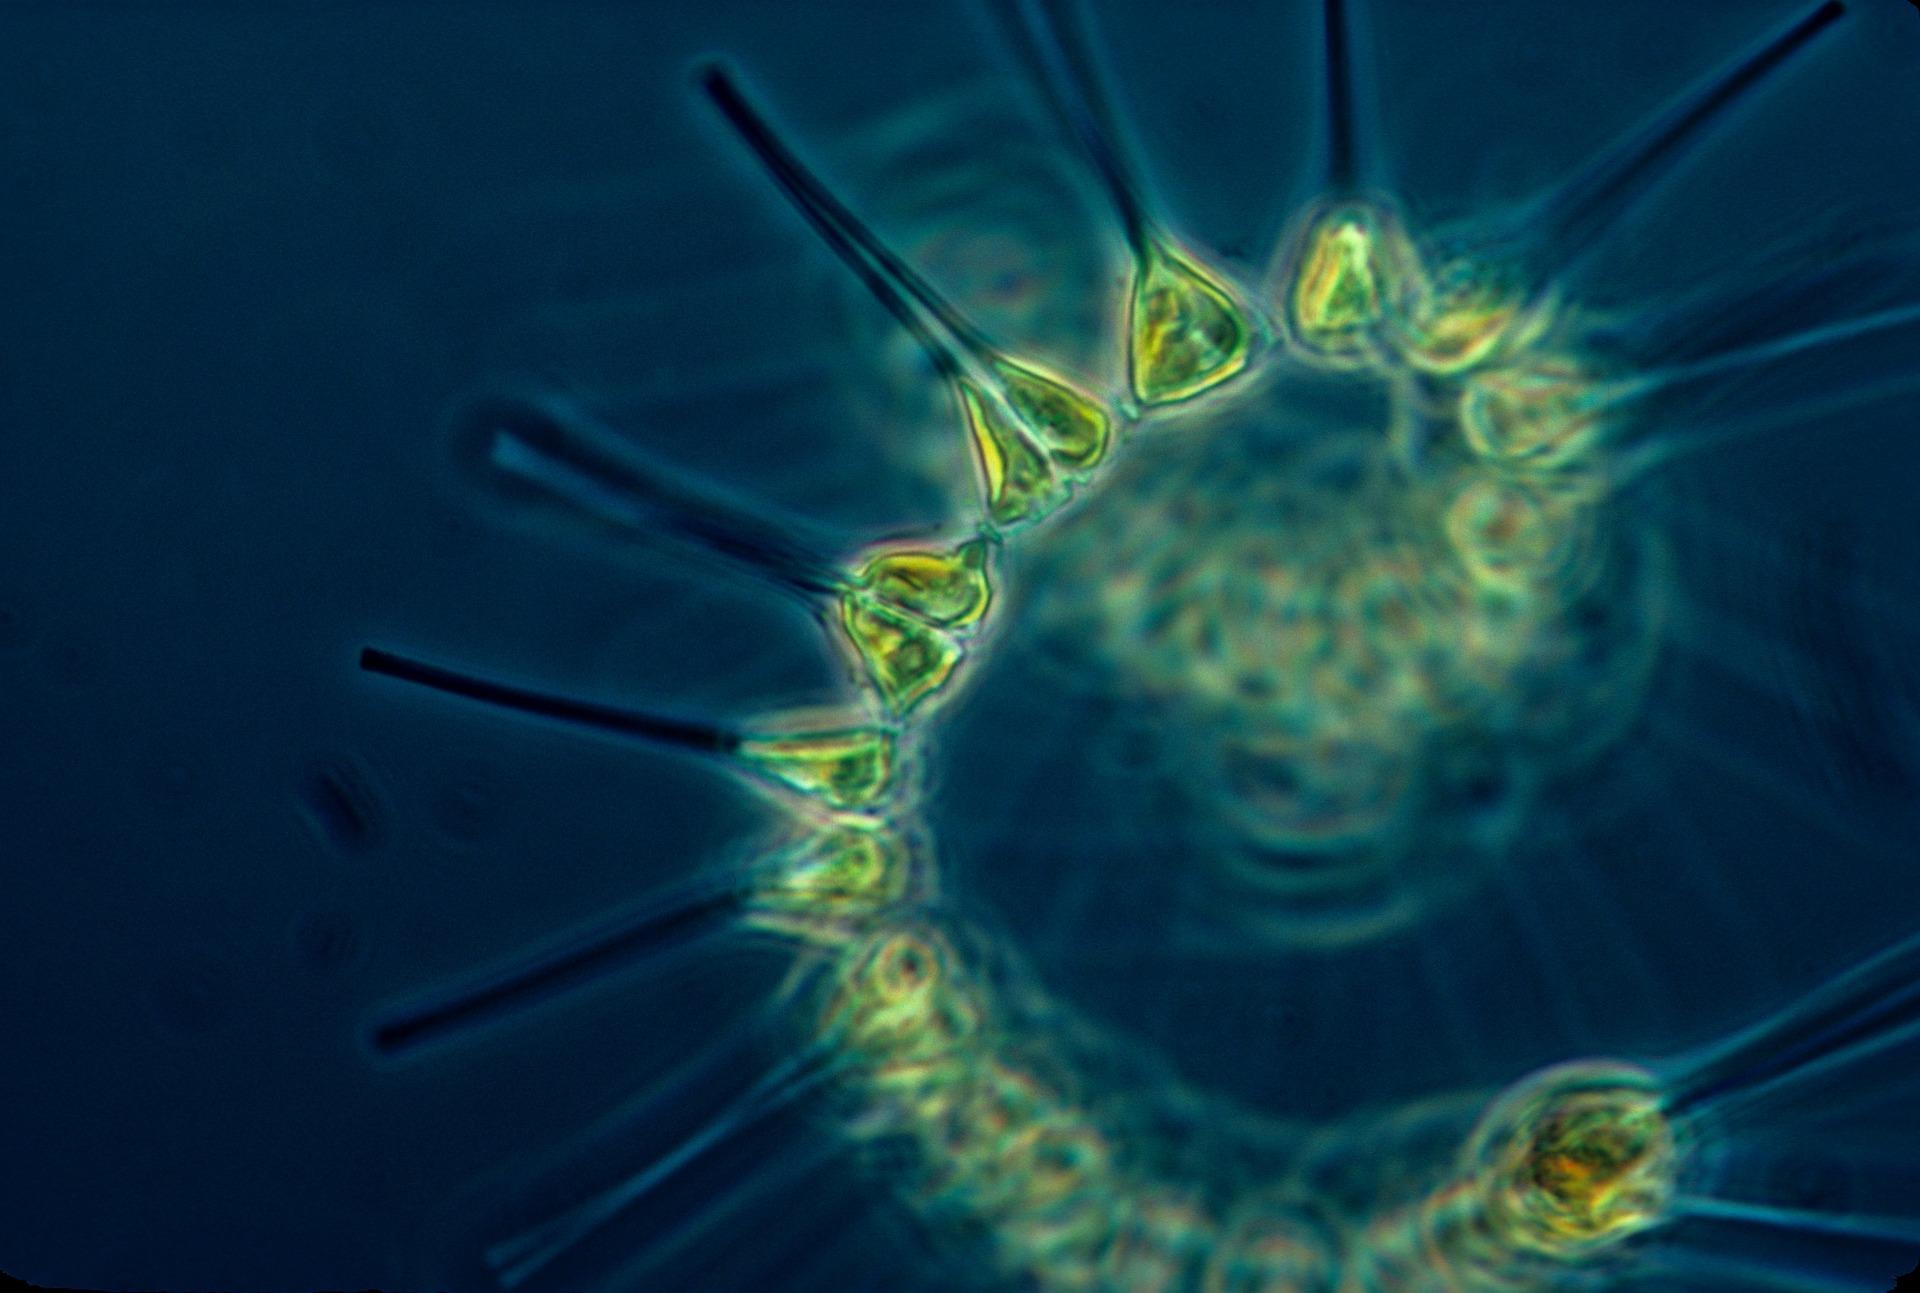 Science Research spotlight: students independent research highlights association between phytoplankton blooms and climate change